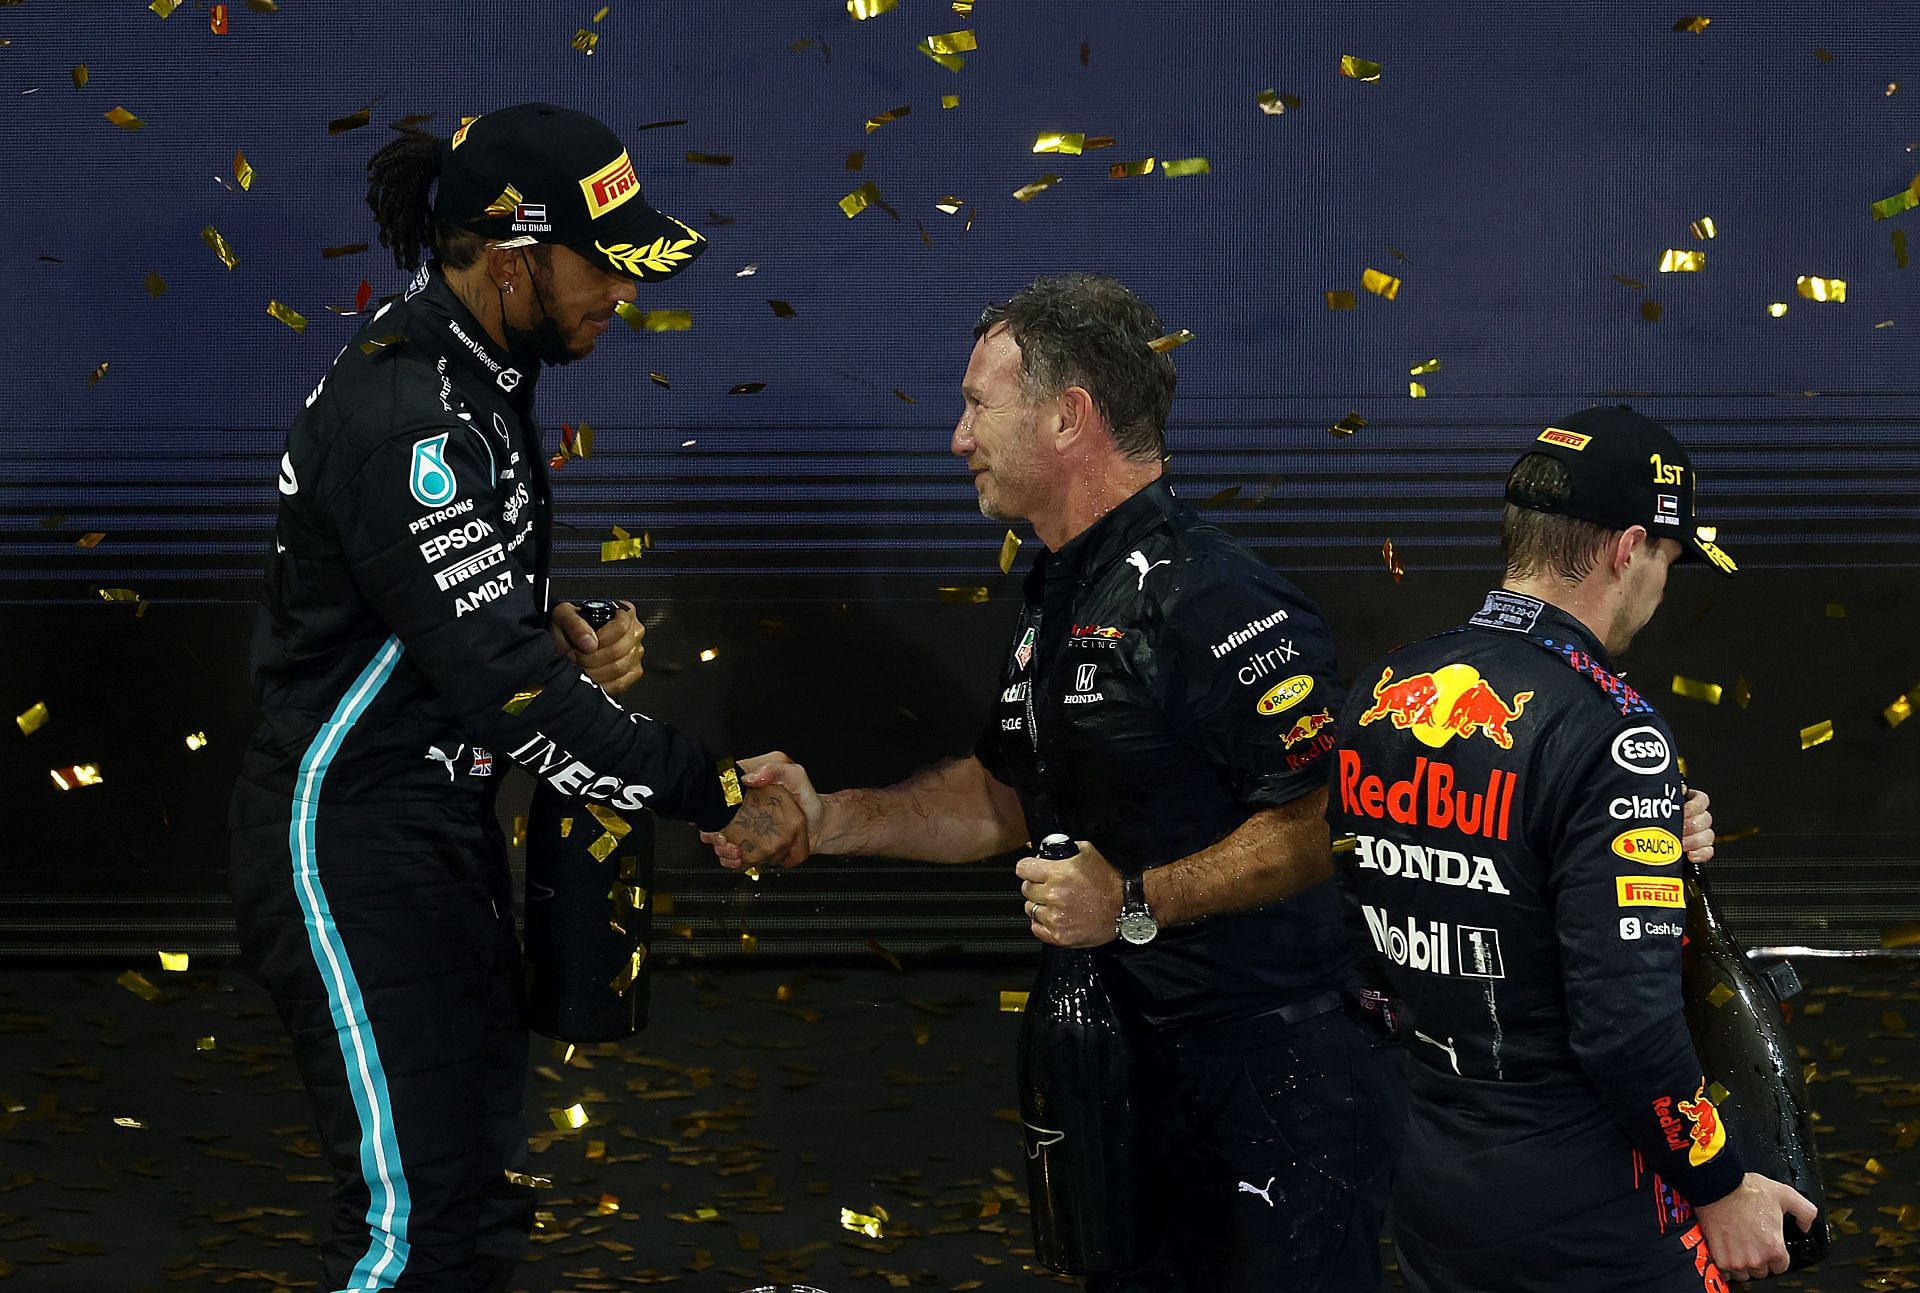 Red Bull Racing team principal Christian Horner shakes hands with second-placed Lewis Hamilton on the podium during the F1 Grand Prix of Abu Dhabi at Yas Marina Circuit on December 12, 2021, in Abu Dhabi, United Arab Emirates (Photo by Clive Rose/Getty Images